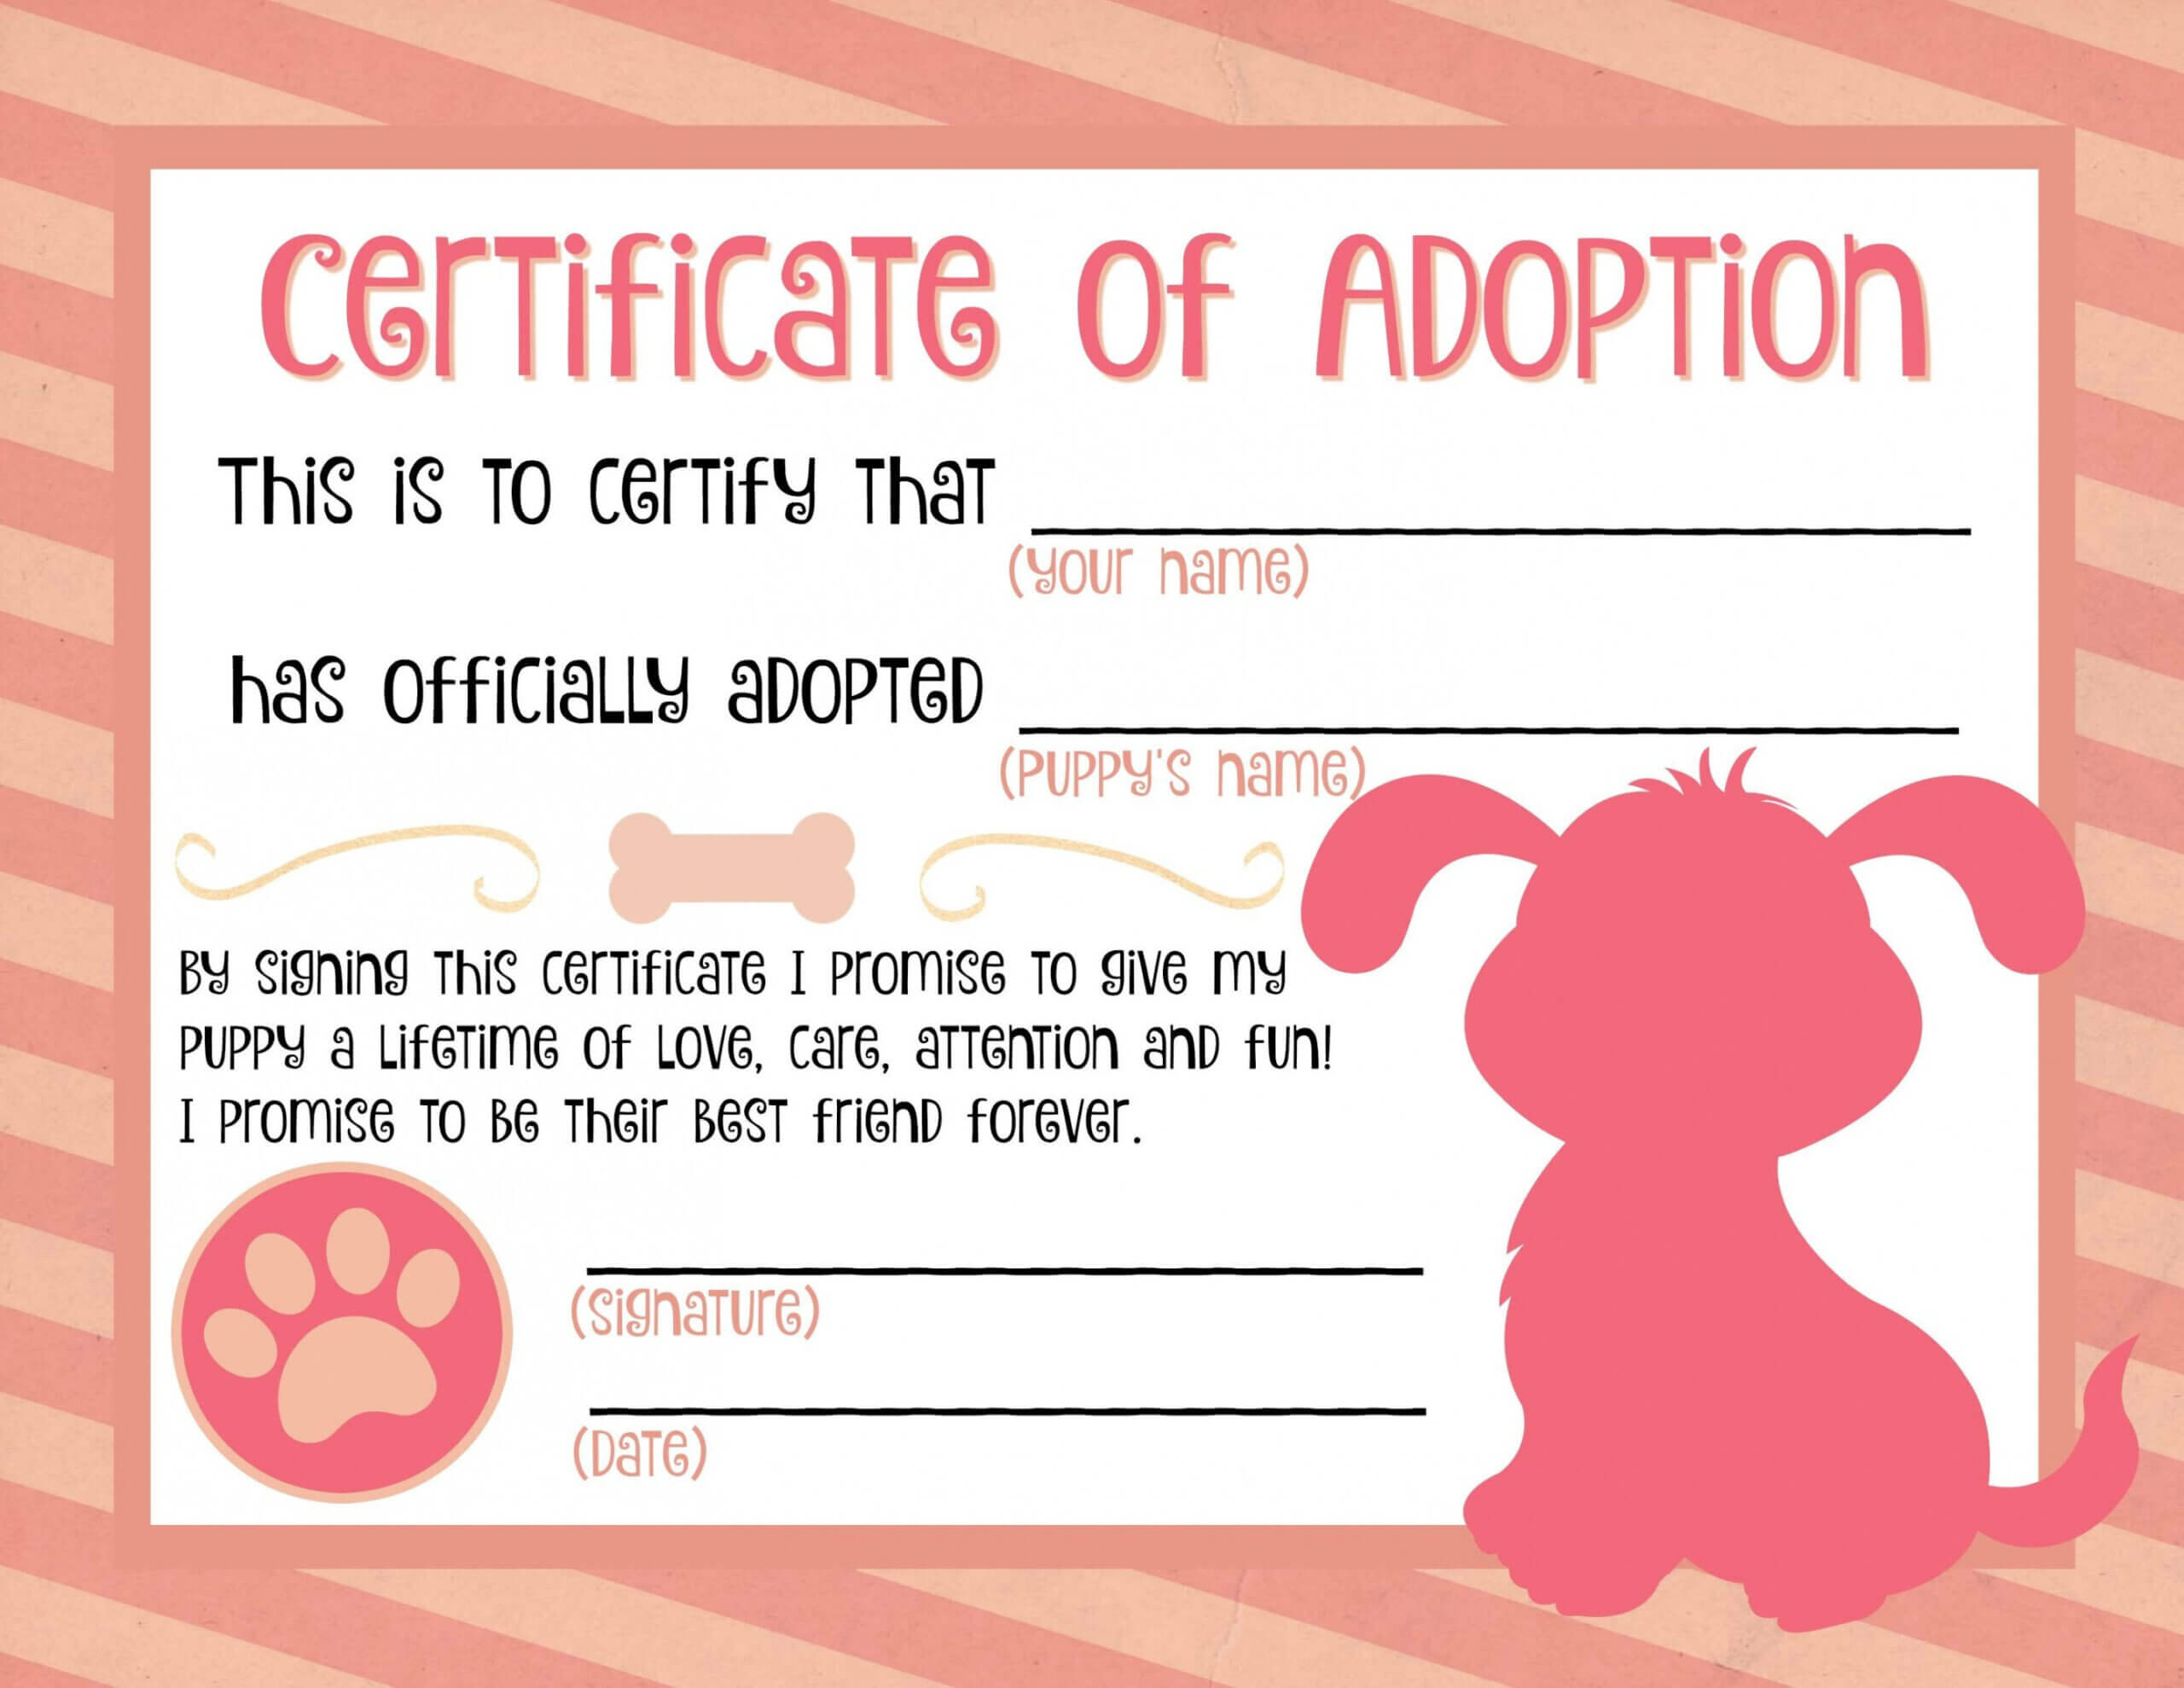 Puppy Adoption Certificate … Party Ideas In 2019… Pet For Pet Adoption Certificate Template